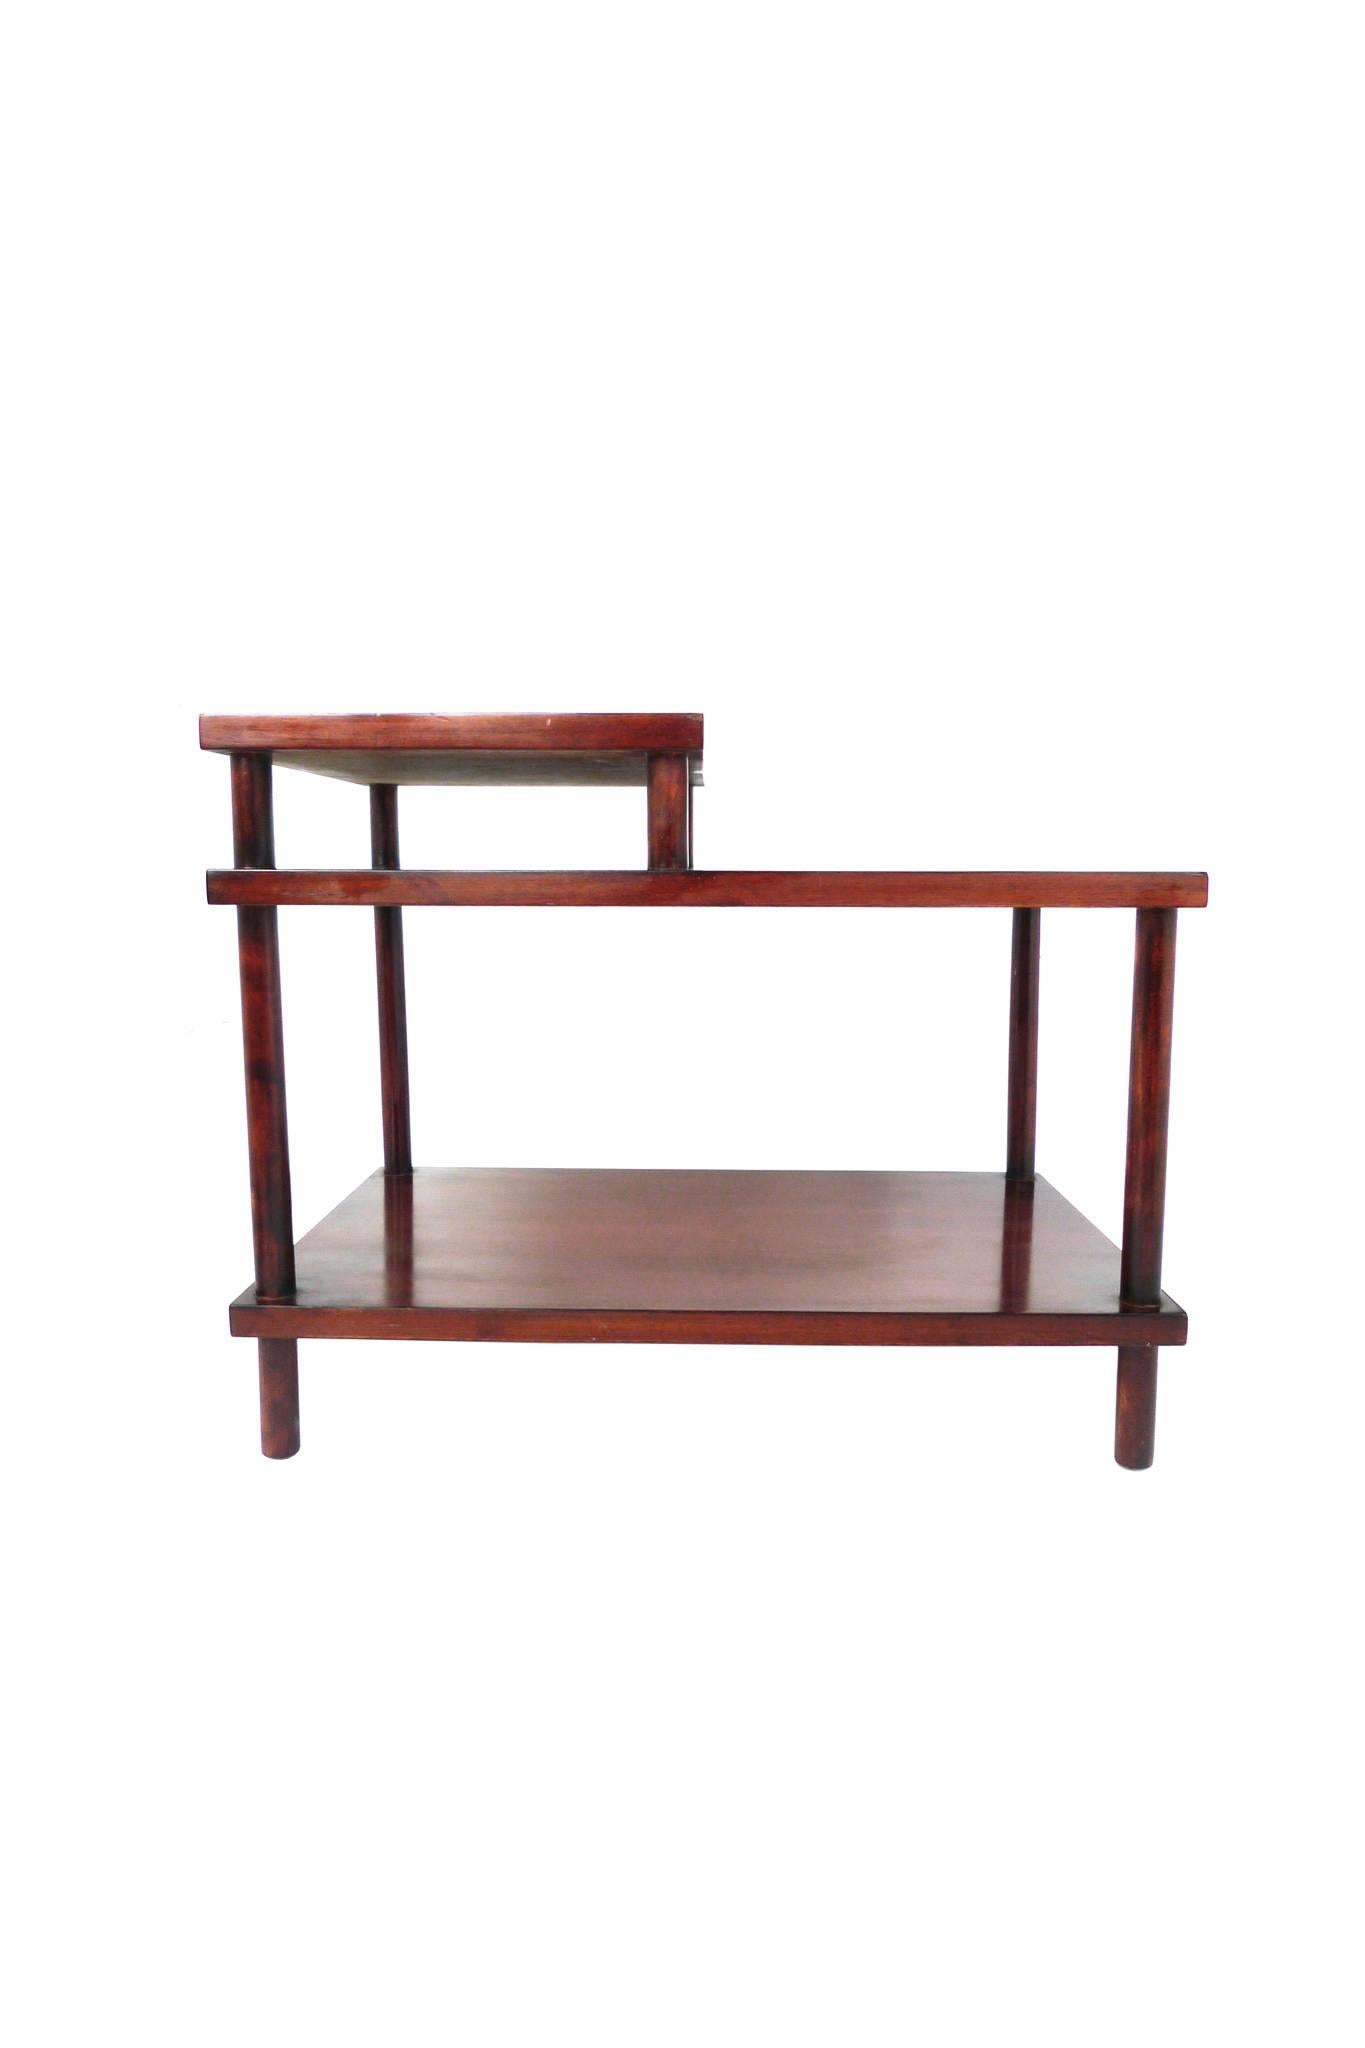 This lacquered side table was designed by T.H. Robsjohn-Gibbings for Widdicomb. It has a beautiful dark-red finish. Its clean lines and planes accentuate the classicism for which Robsjohn-Gibbings was renowned.
 